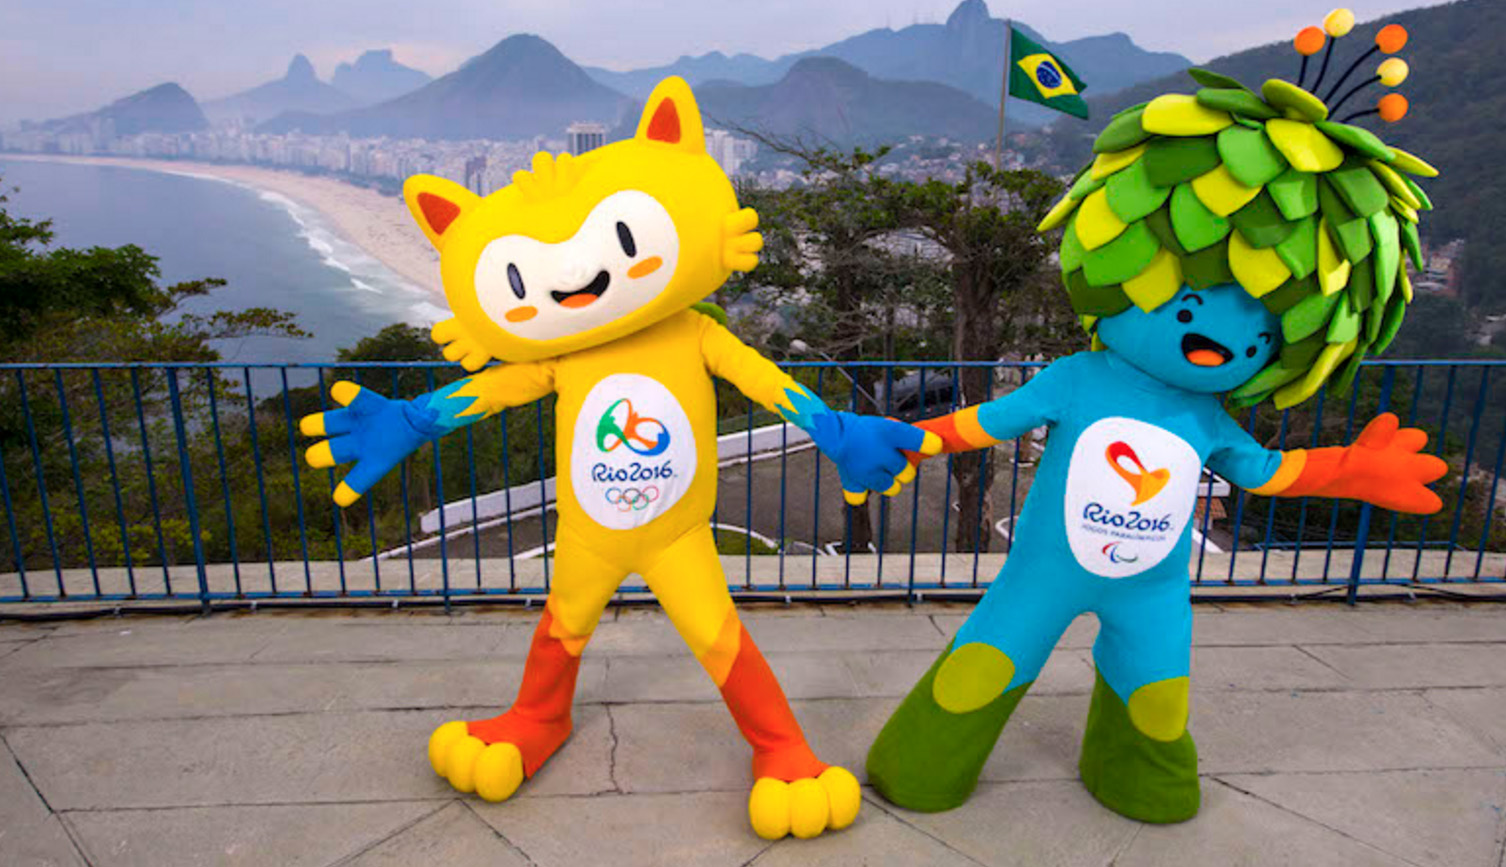 Vinicius and Tom are the most for Rio 2016 Olympics and Para Olympics